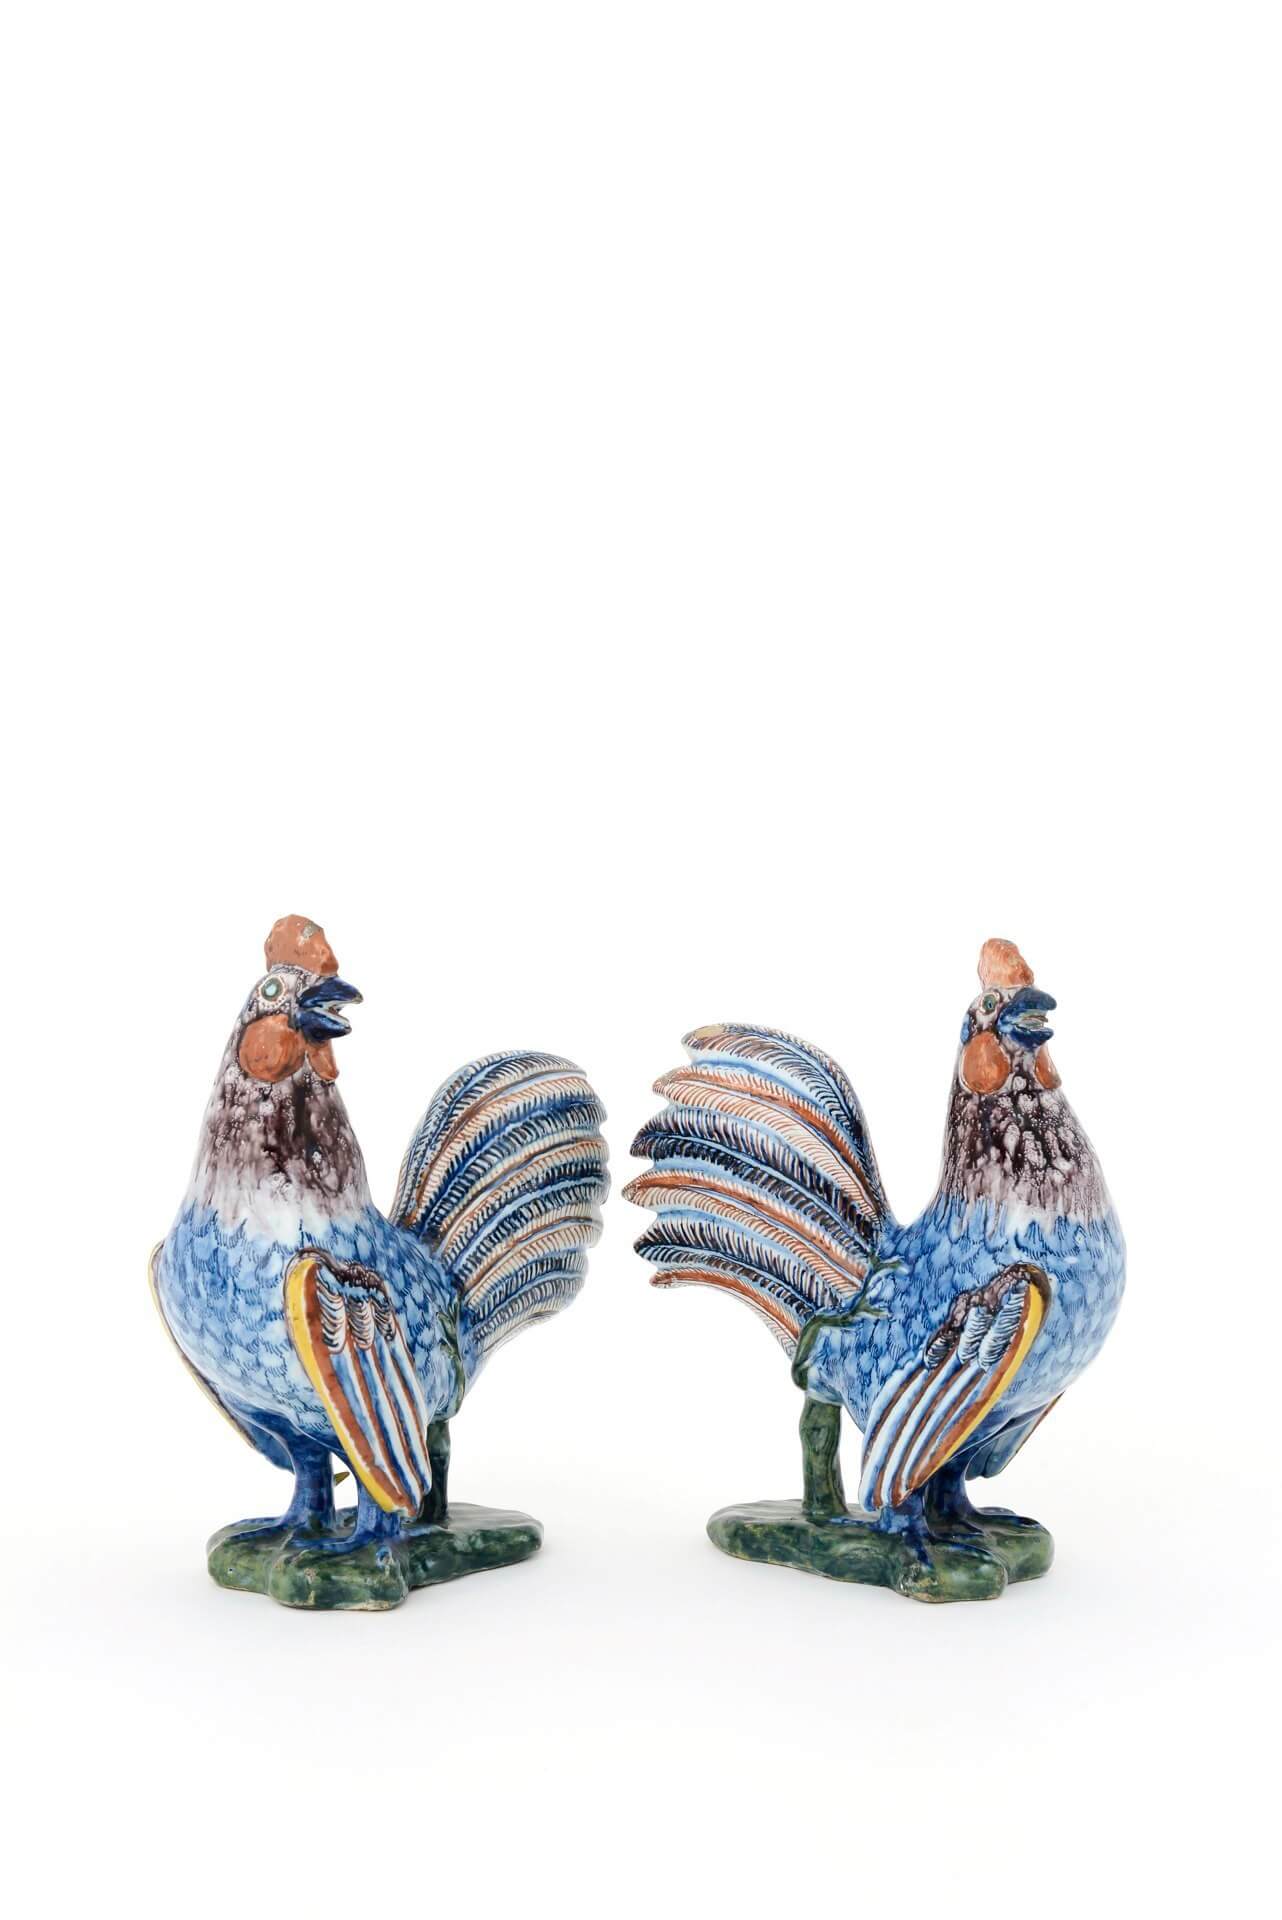 • D1350. Pair of Polychrome Figures of Roosters